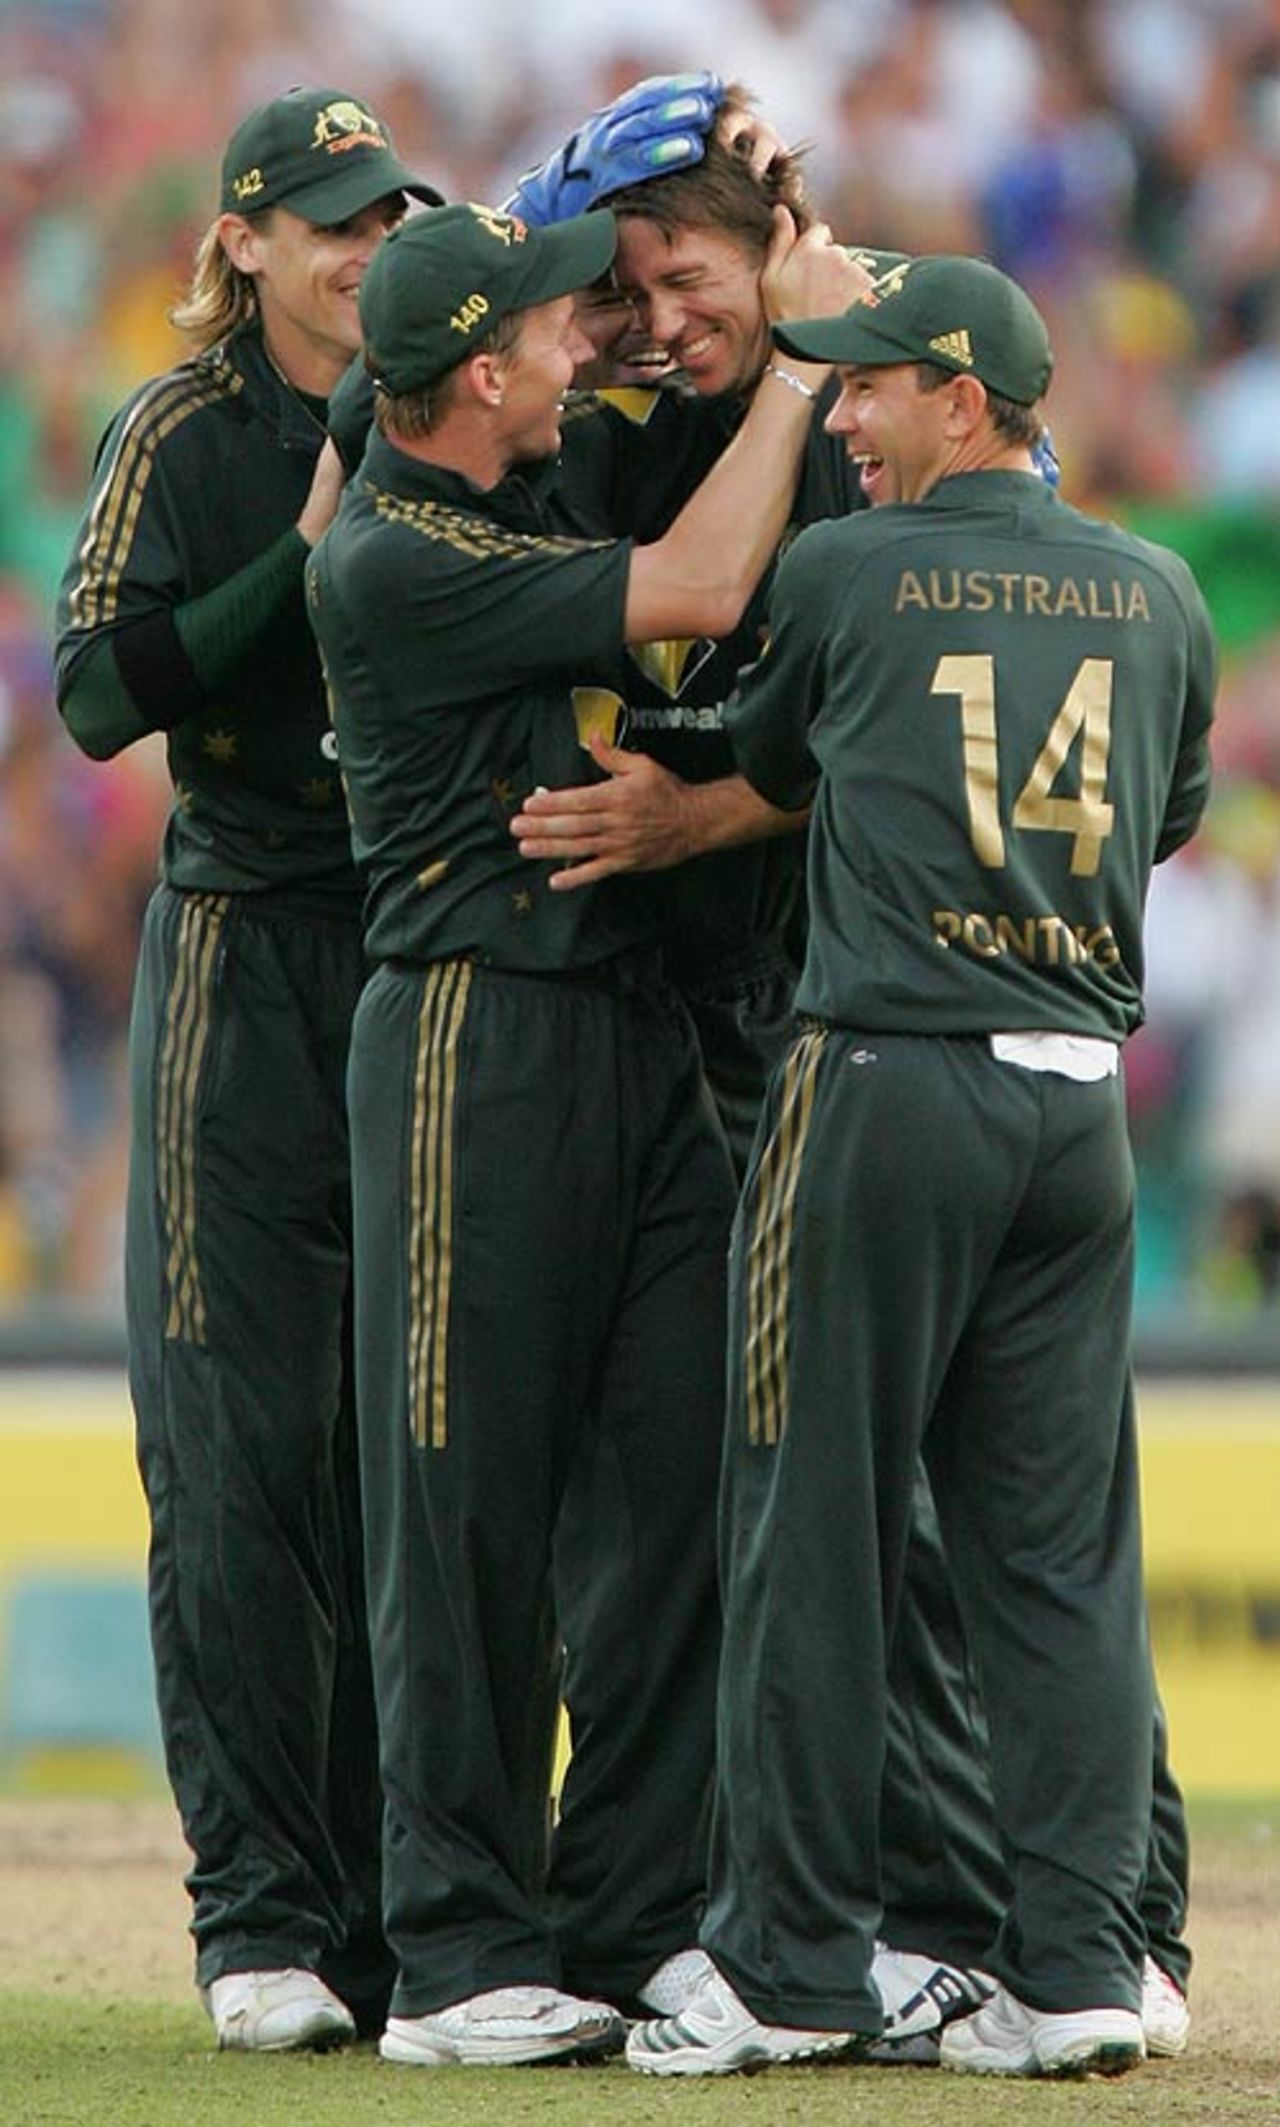 Glenn McGrath is swamped by his team-mates after taking a wicket with his last ball at the SCG, Australia v England, CB Series, 2nd final, Sydney, February 11, 2007